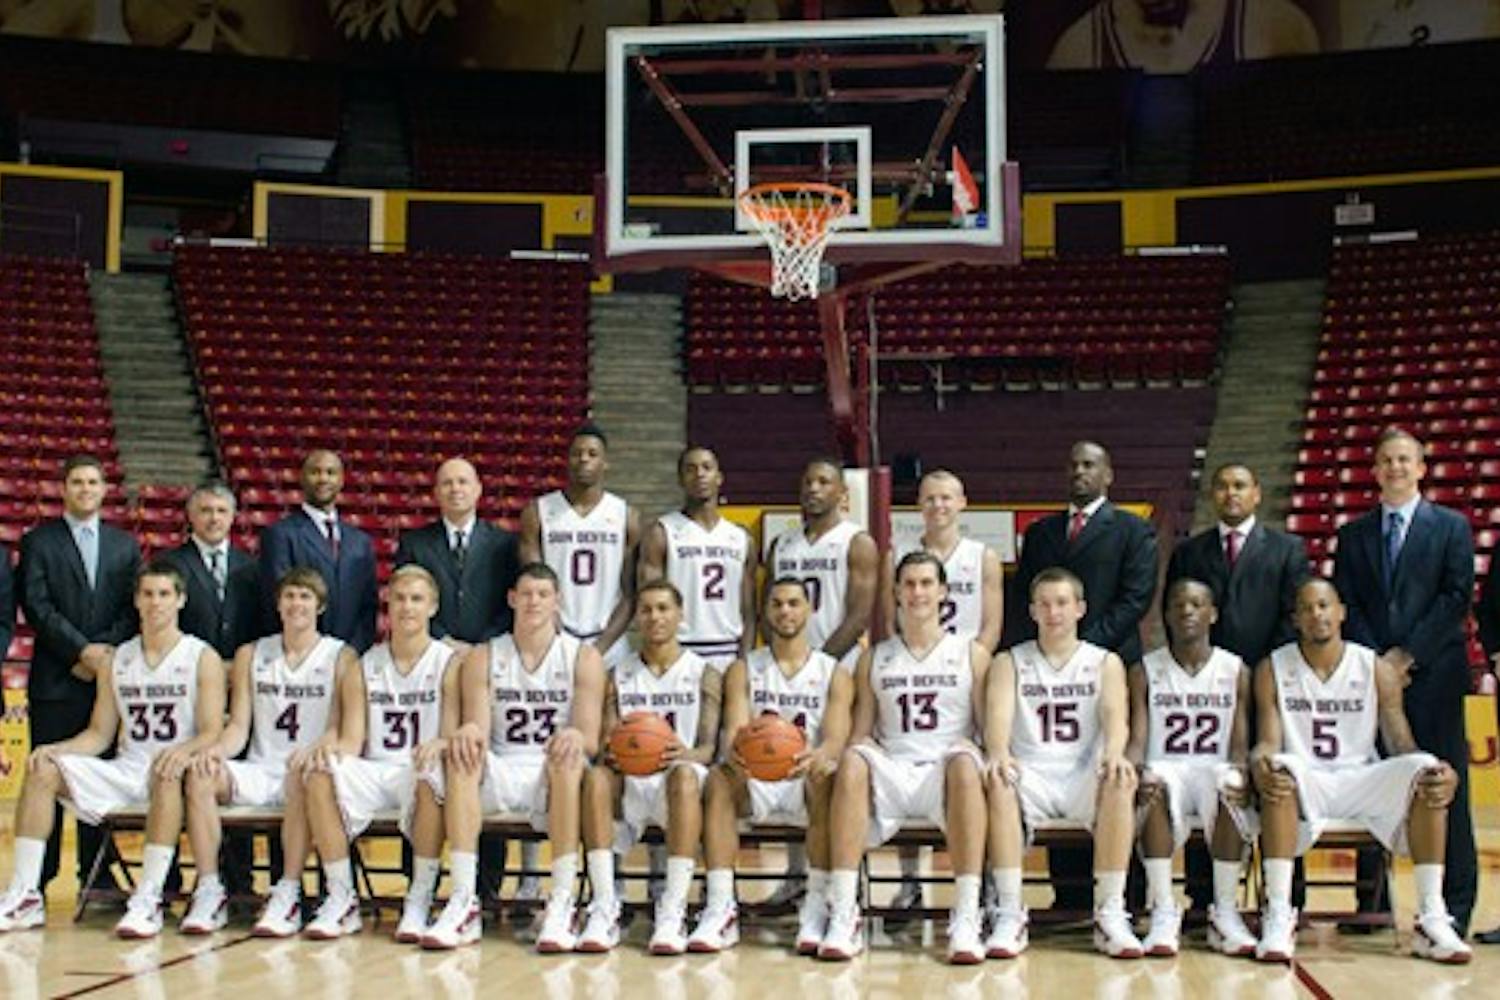 FRESH START: The ASU men’s basketball team poses for photos during media day on Wednesday. The Sun Devils have are hoping to capitalize on the new season after a less-than-stellar campaign last year. (Photo by Aaron Lavinsky)